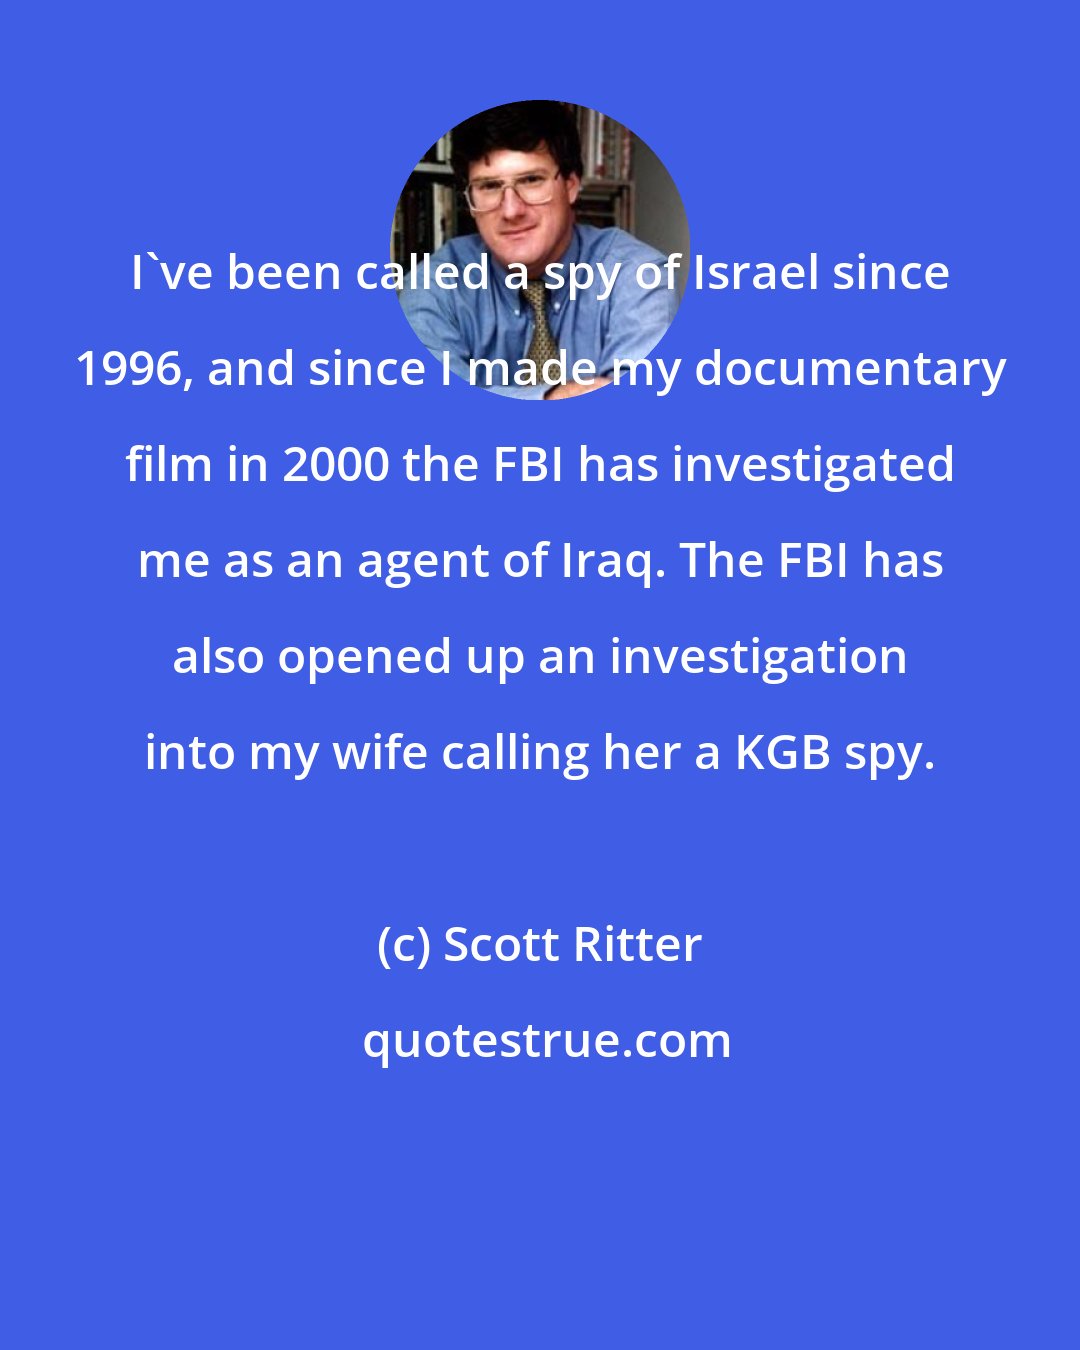 Scott Ritter: I've been called a spy of Israel since 1996, and since I made my documentary film in 2000 the FBI has investigated me as an agent of Iraq. The FBI has also opened up an investigation into my wife calling her a KGB spy.